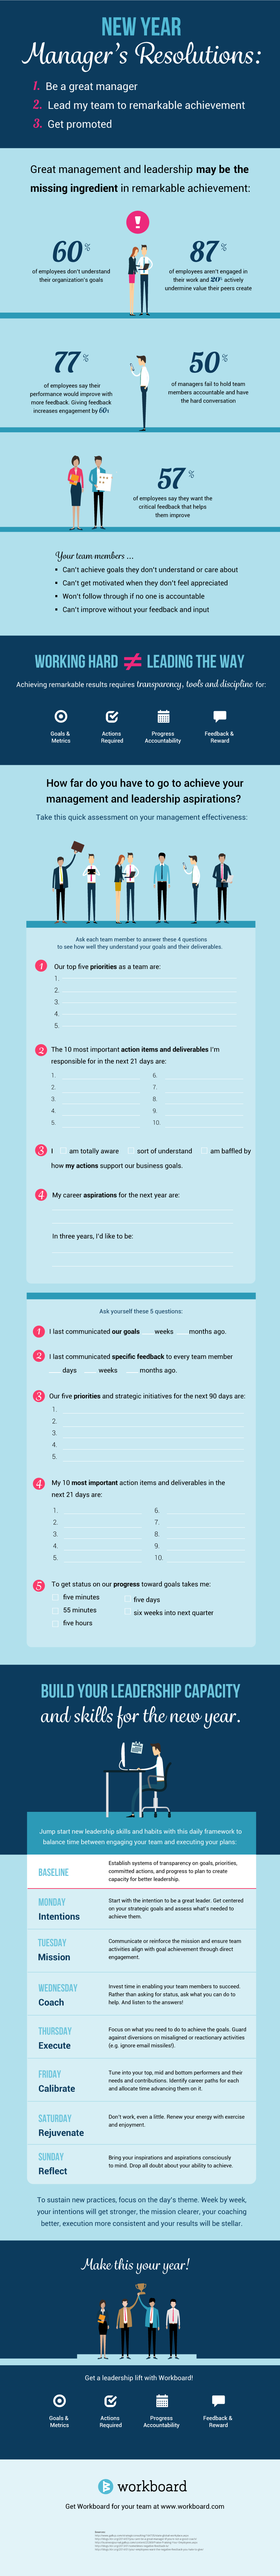 Infographic: Build Your Leadership Capacity